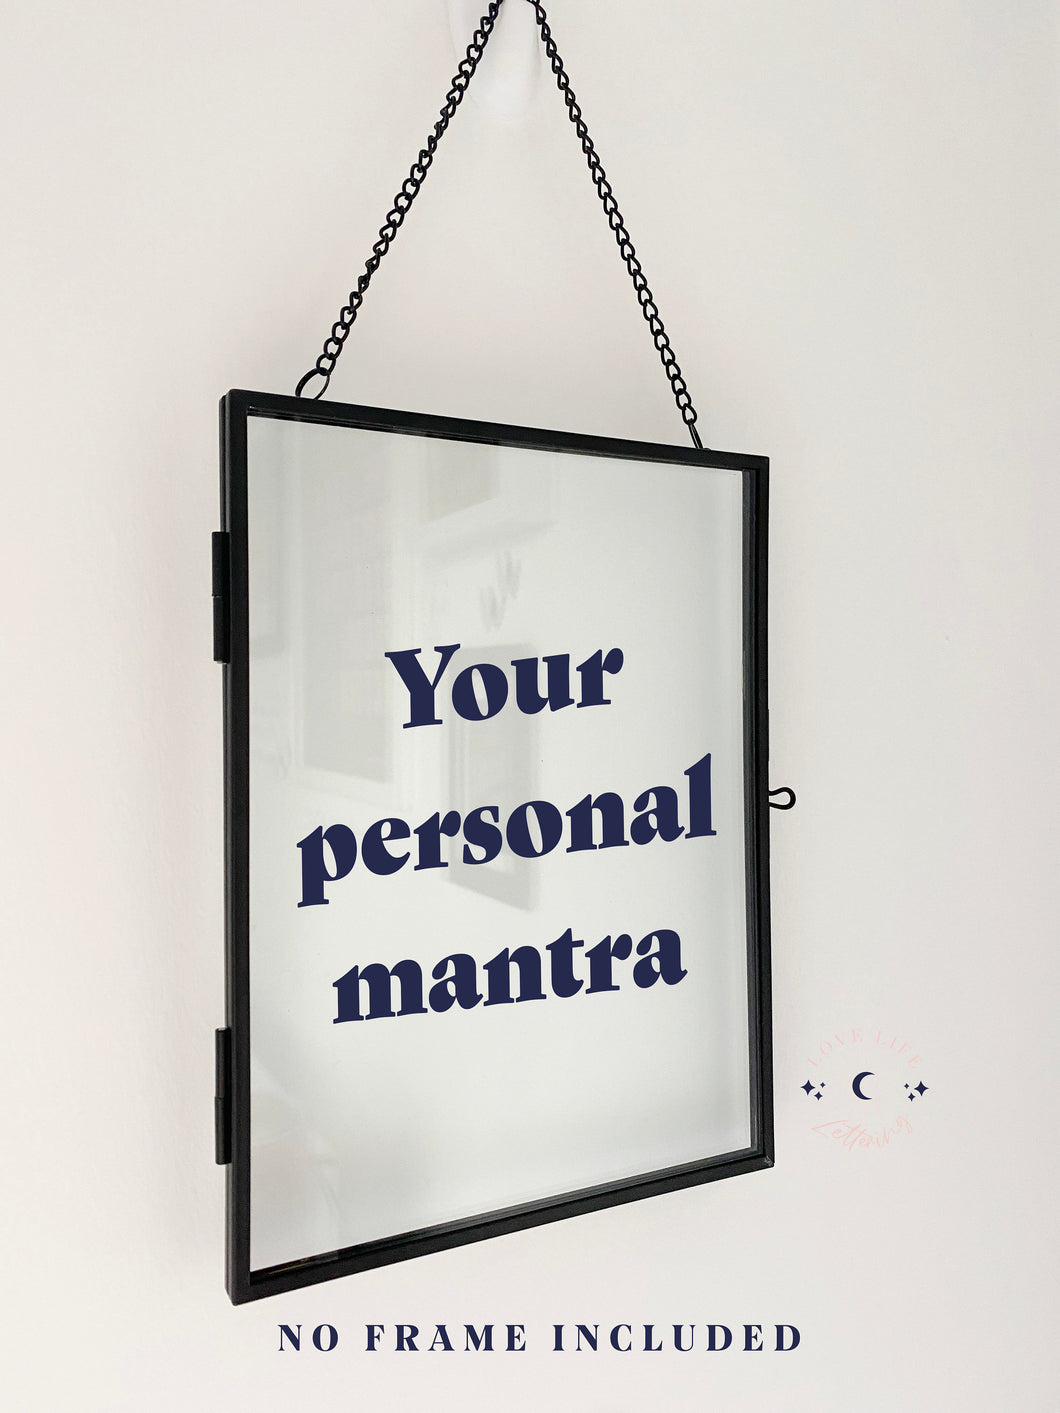 Vinyl Decal Sticker Personal Mantra For DIY Home Decor // Blank Frame Sticker, Add Your Favourite Quote